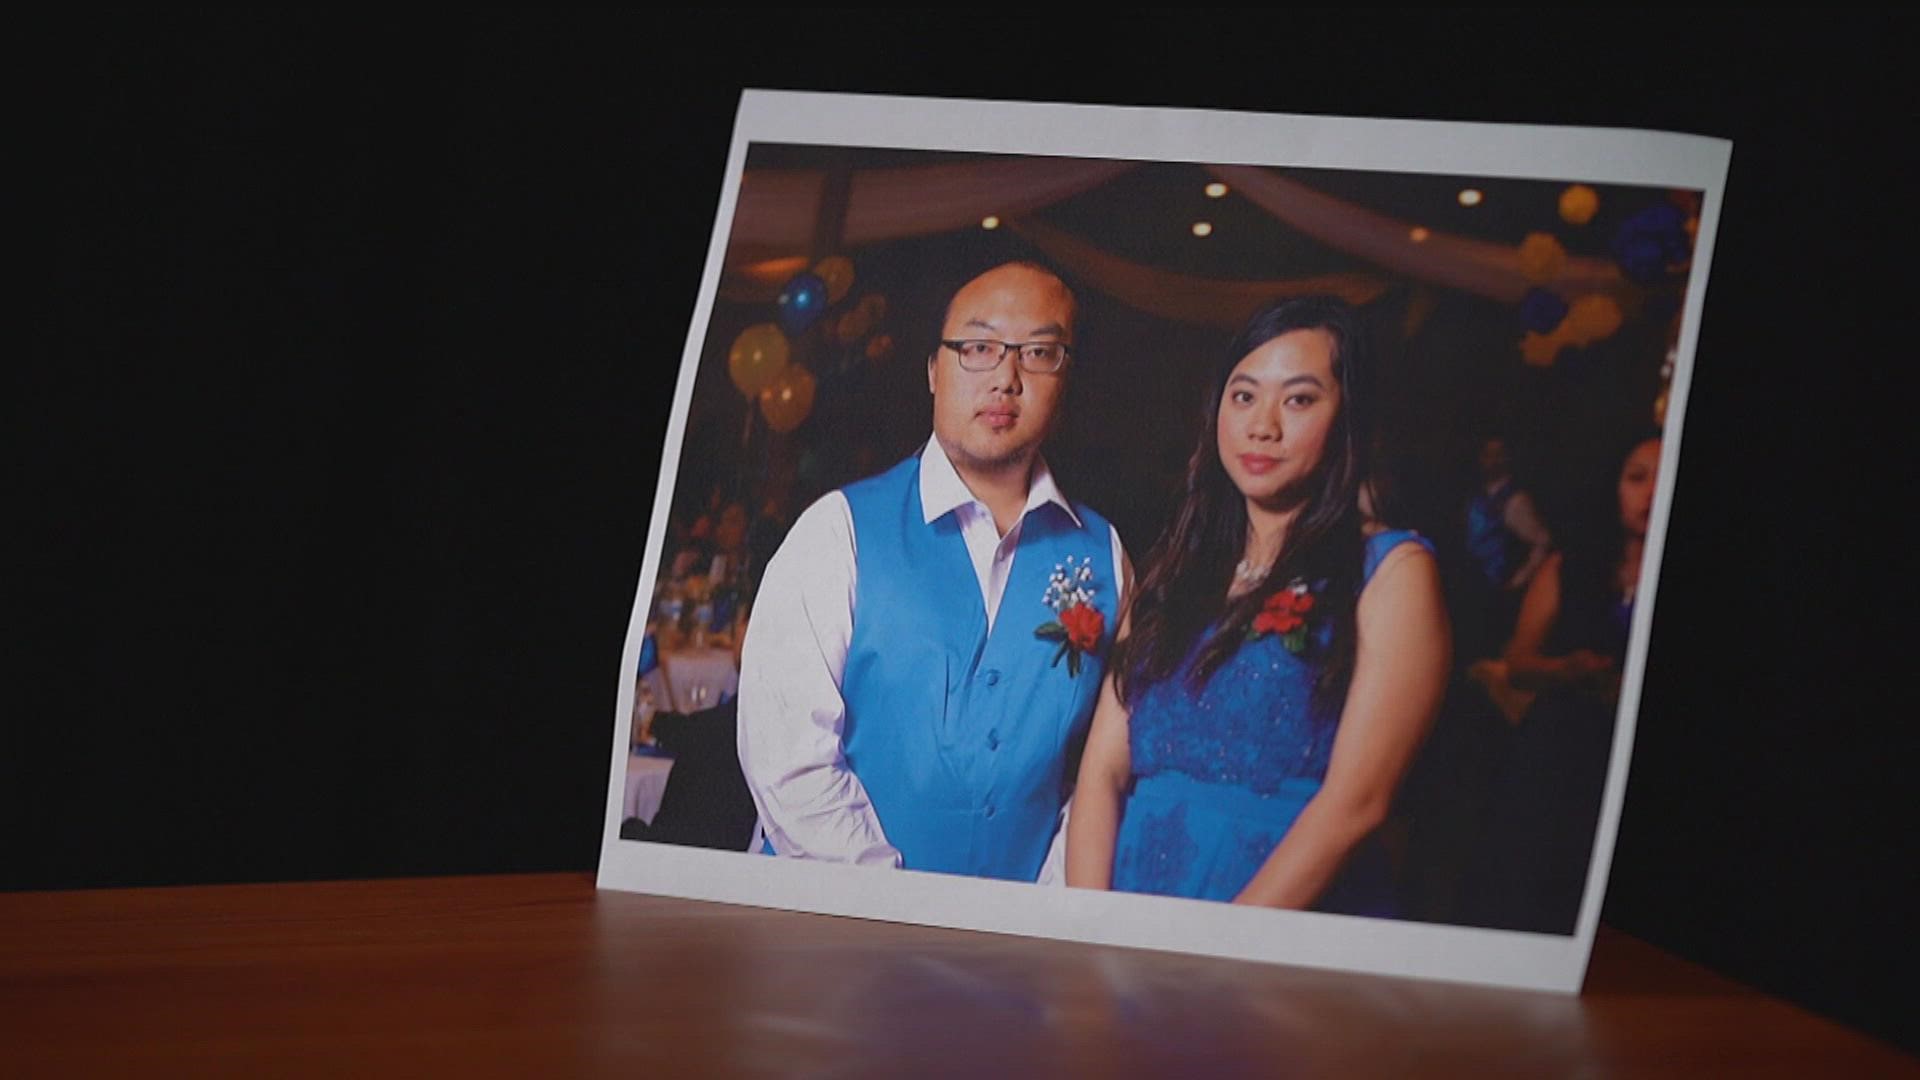 The family of murder-suicide victims Yia Xiong and Ka Lor are asking for help supporting the couple's children following their tragic deaths.